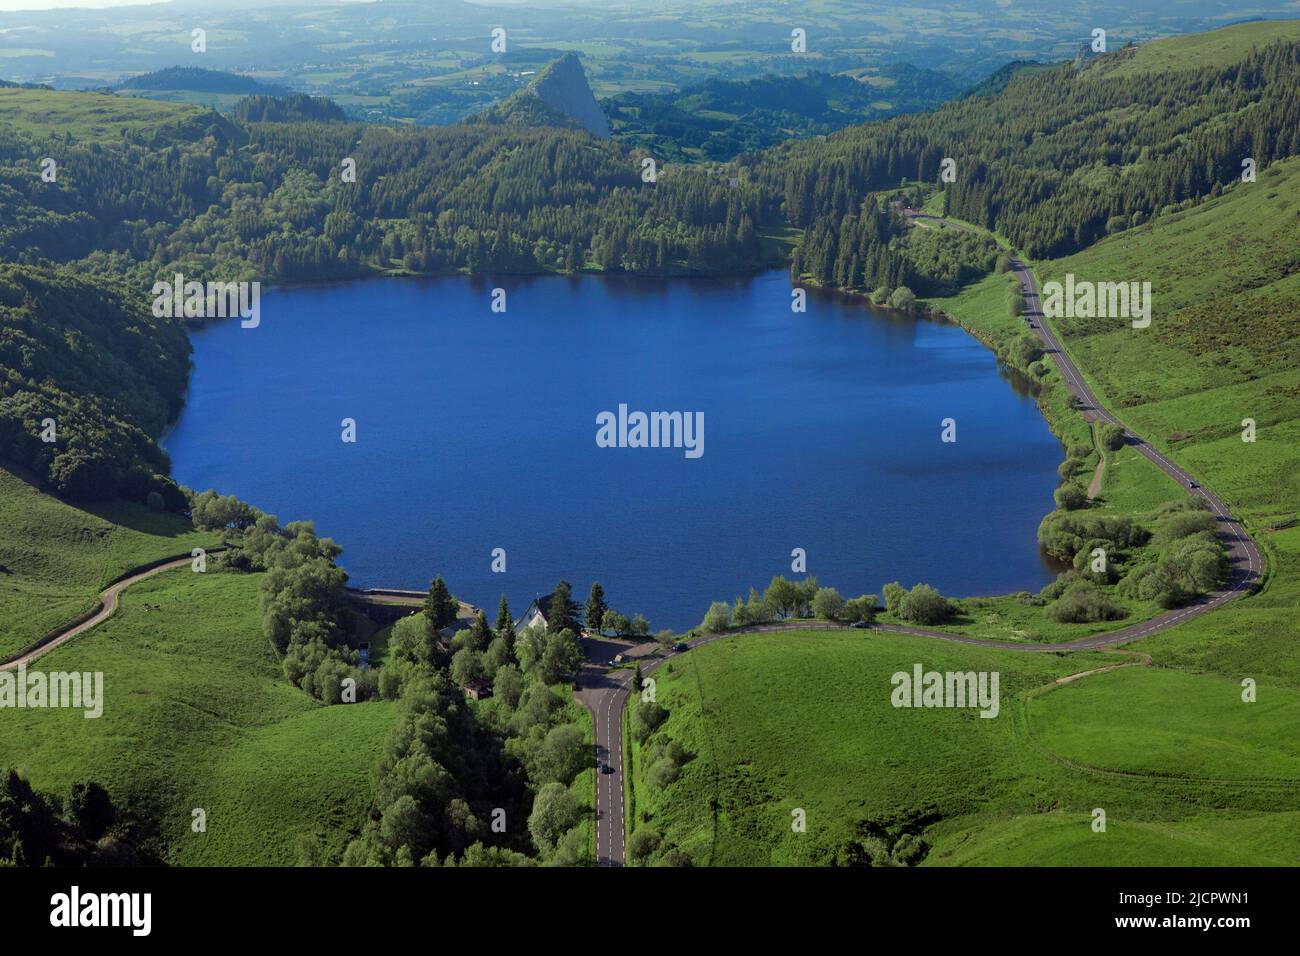 France, Puy-de-Dôme Lake Guéry mountain lake of volcanic origin located in the Massif des Monts Dore, aerial view; Stock Photo